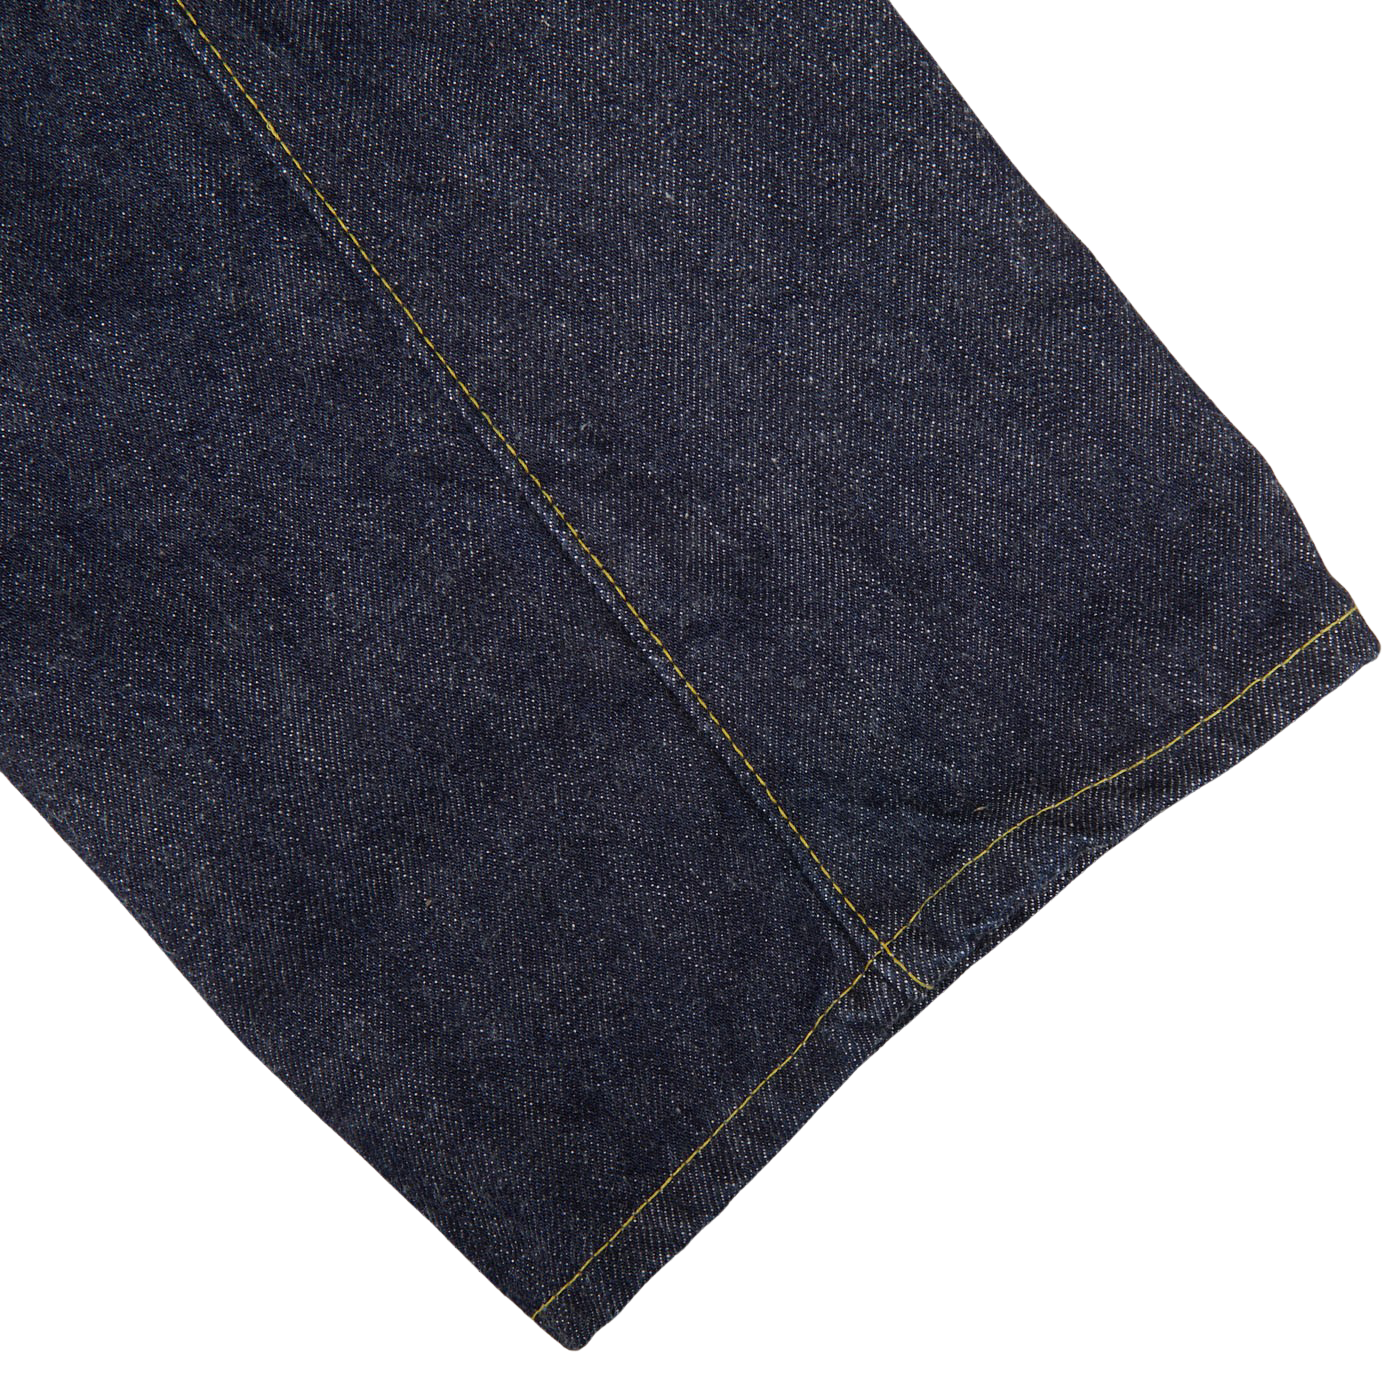 Close-up of Resolute's Dark Blue Cotton 714 One Wash Jeans with visible yellow stitching on a light gray background.